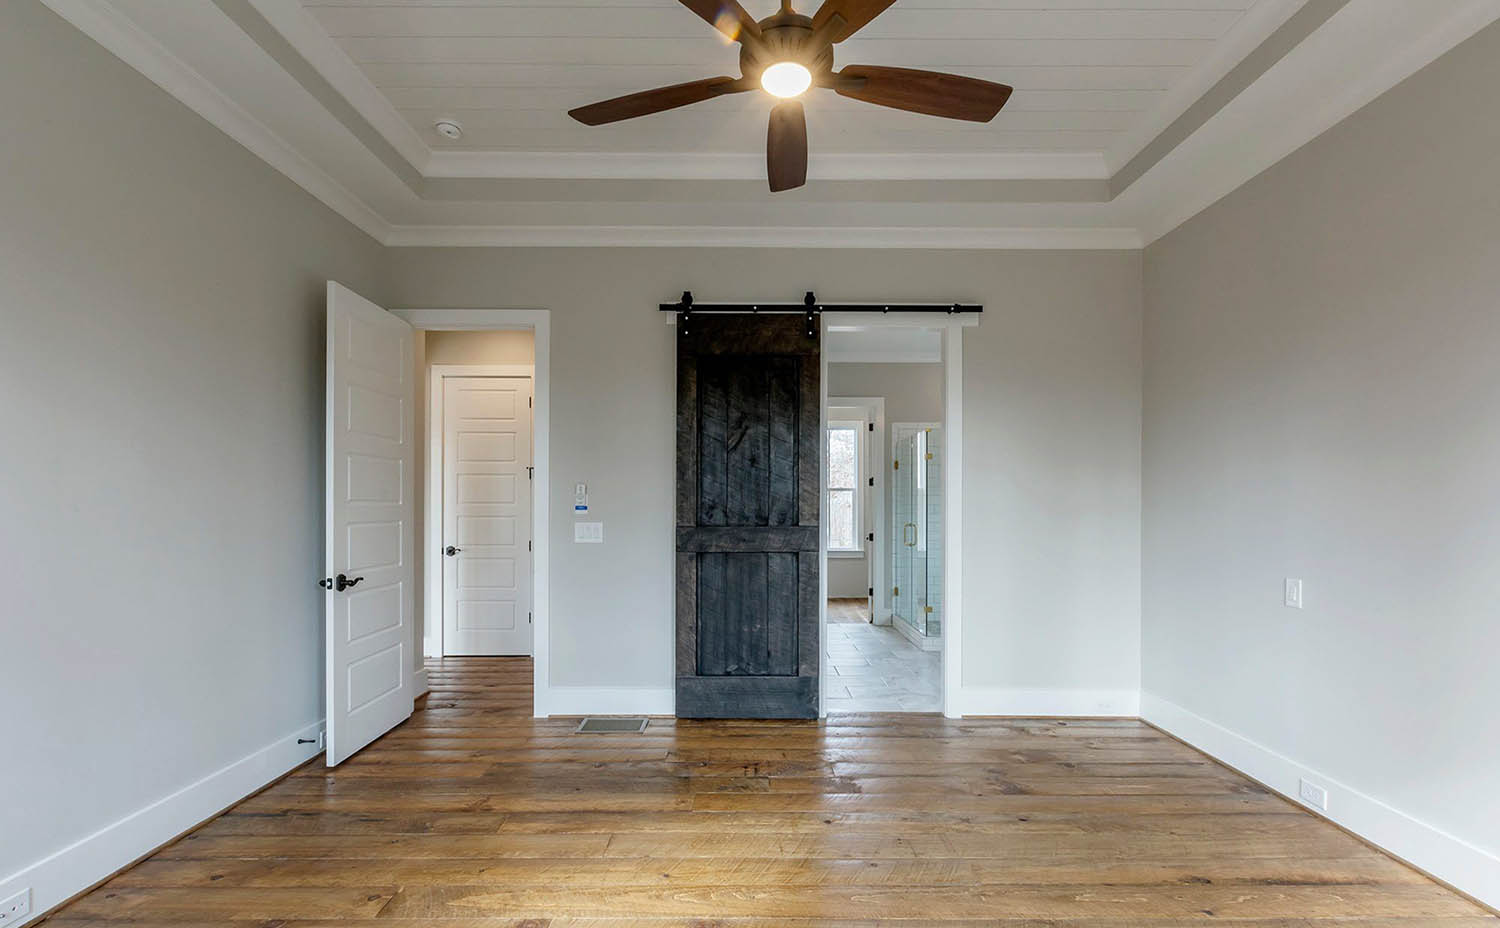 French style interior barn doors with black handles and mounting hardware. Beautiful white painted finish perfectly matches the walls and trim. medium stained wood floors.